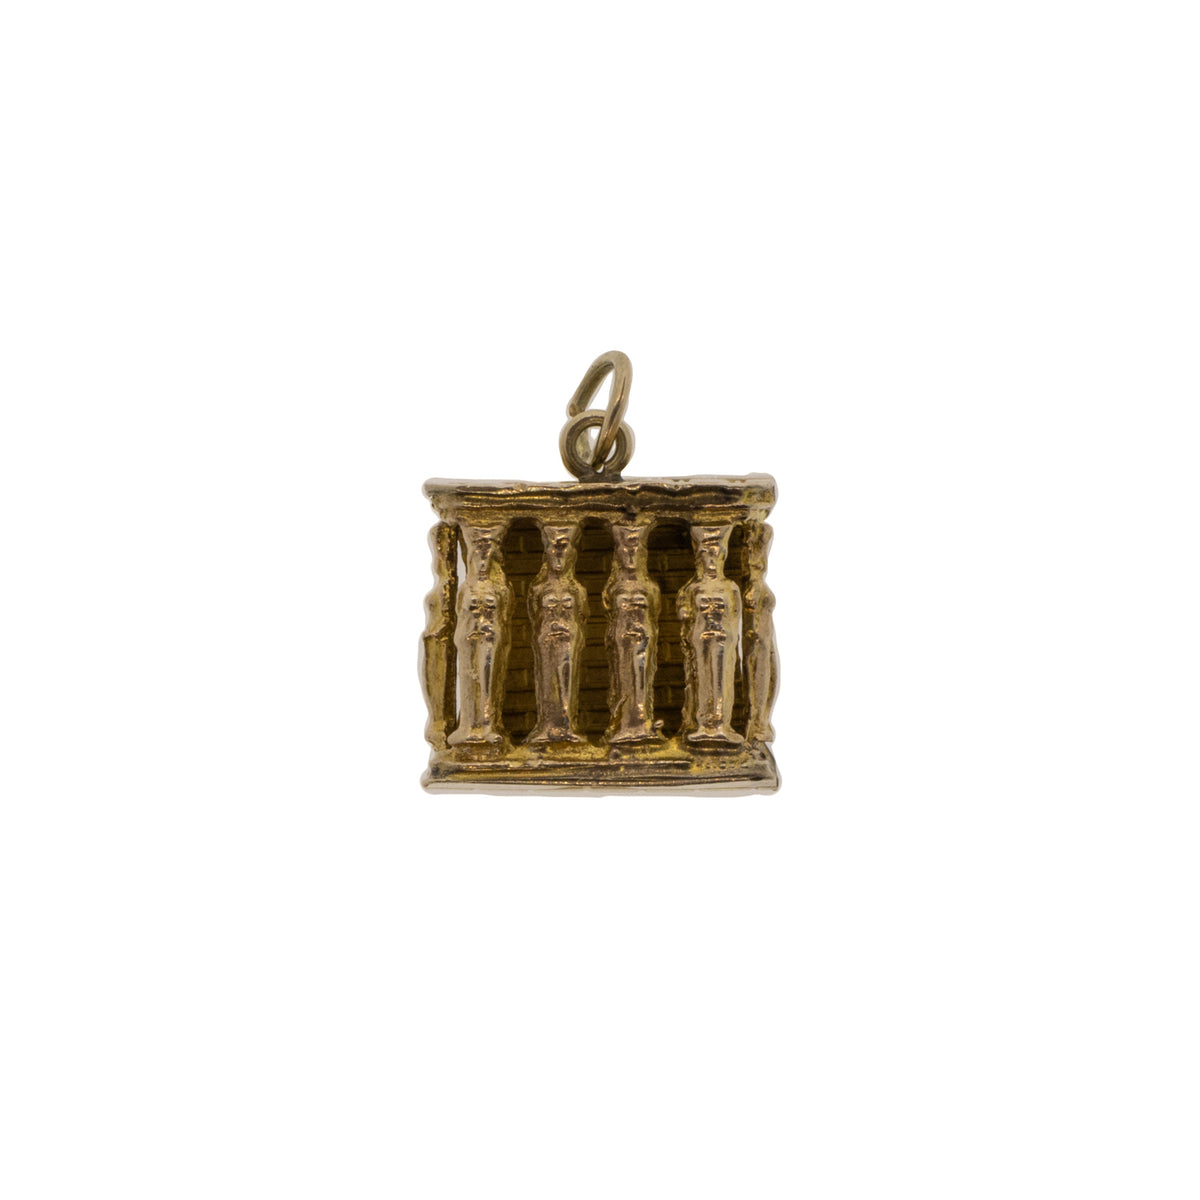 Porch of the Maidens "Caryatid" Vintage Charm